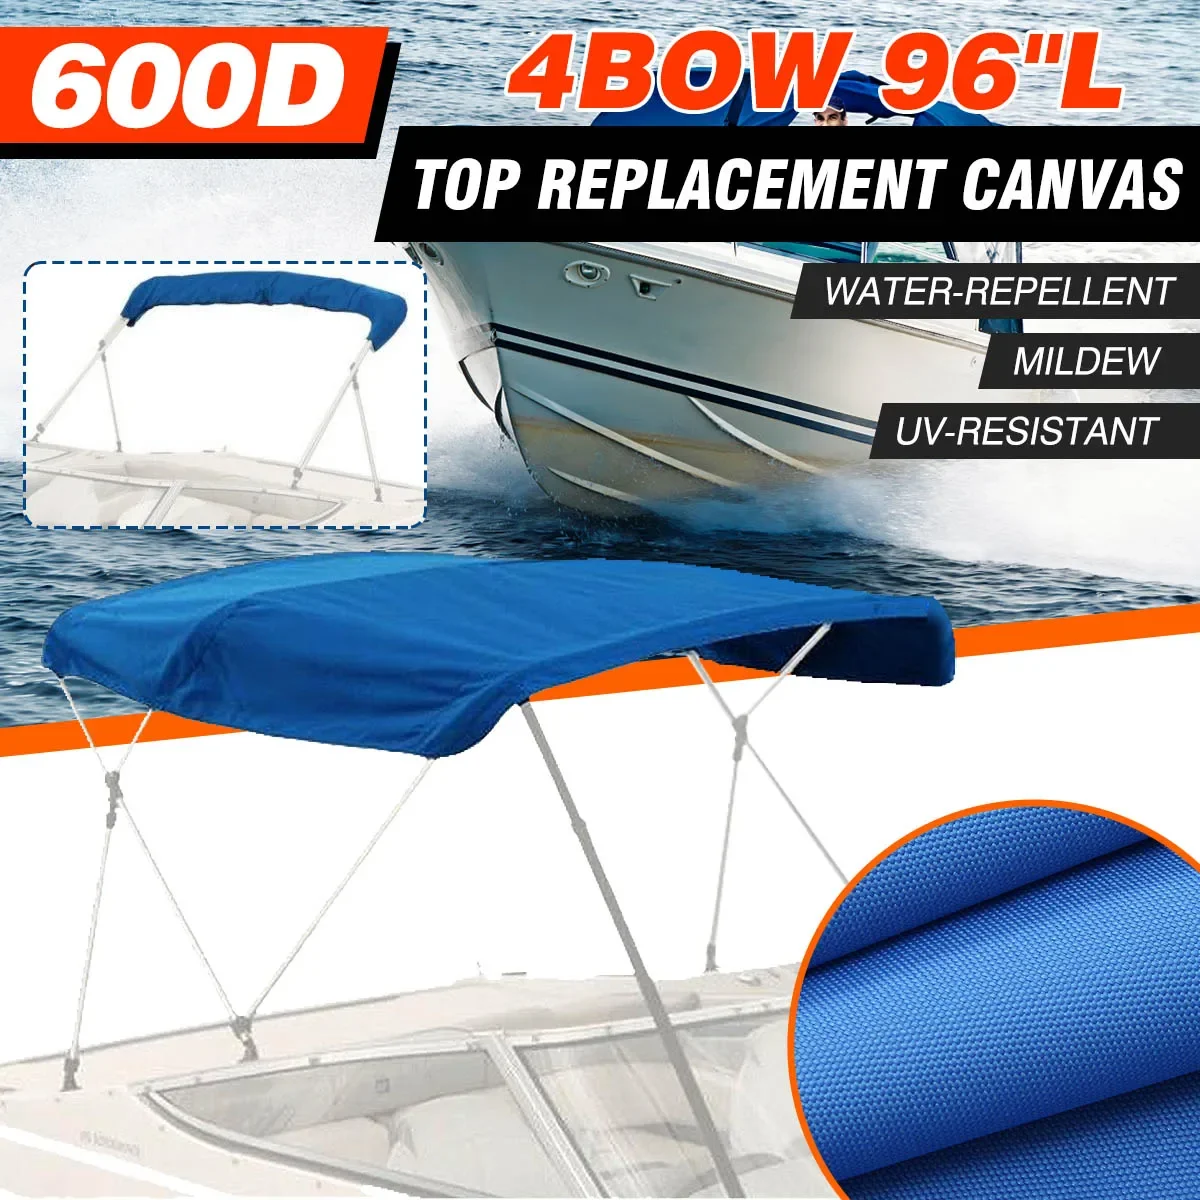 

600D Boat Cover 4 Bow Bimini Top Canvas Canopy with Boot Cover Marine Cover Anti UV For V-Hull Jon Center Console Boat